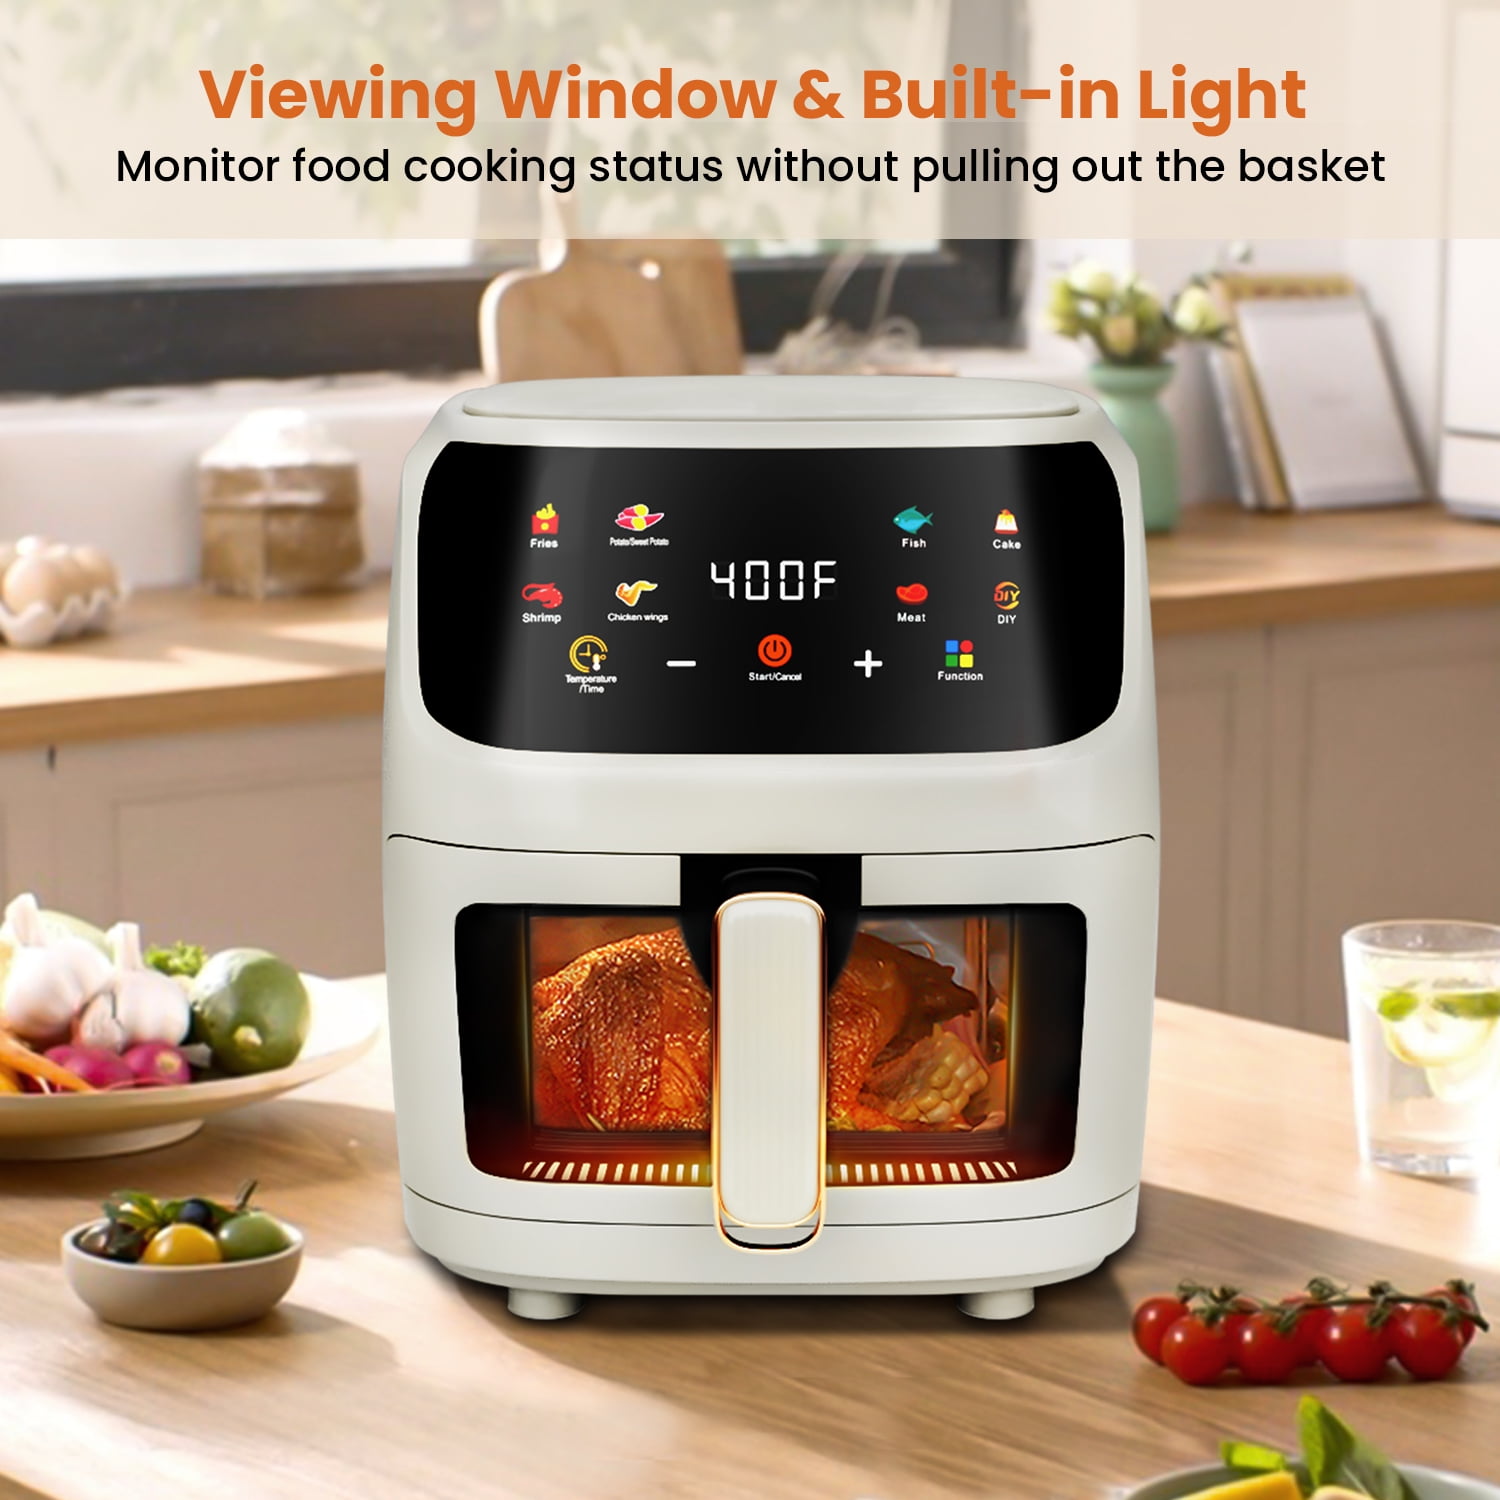 Air Fryer 7.5QT, Large 8-in-1 Digital Touchscreen, Visible Window, 1700W, New, Black